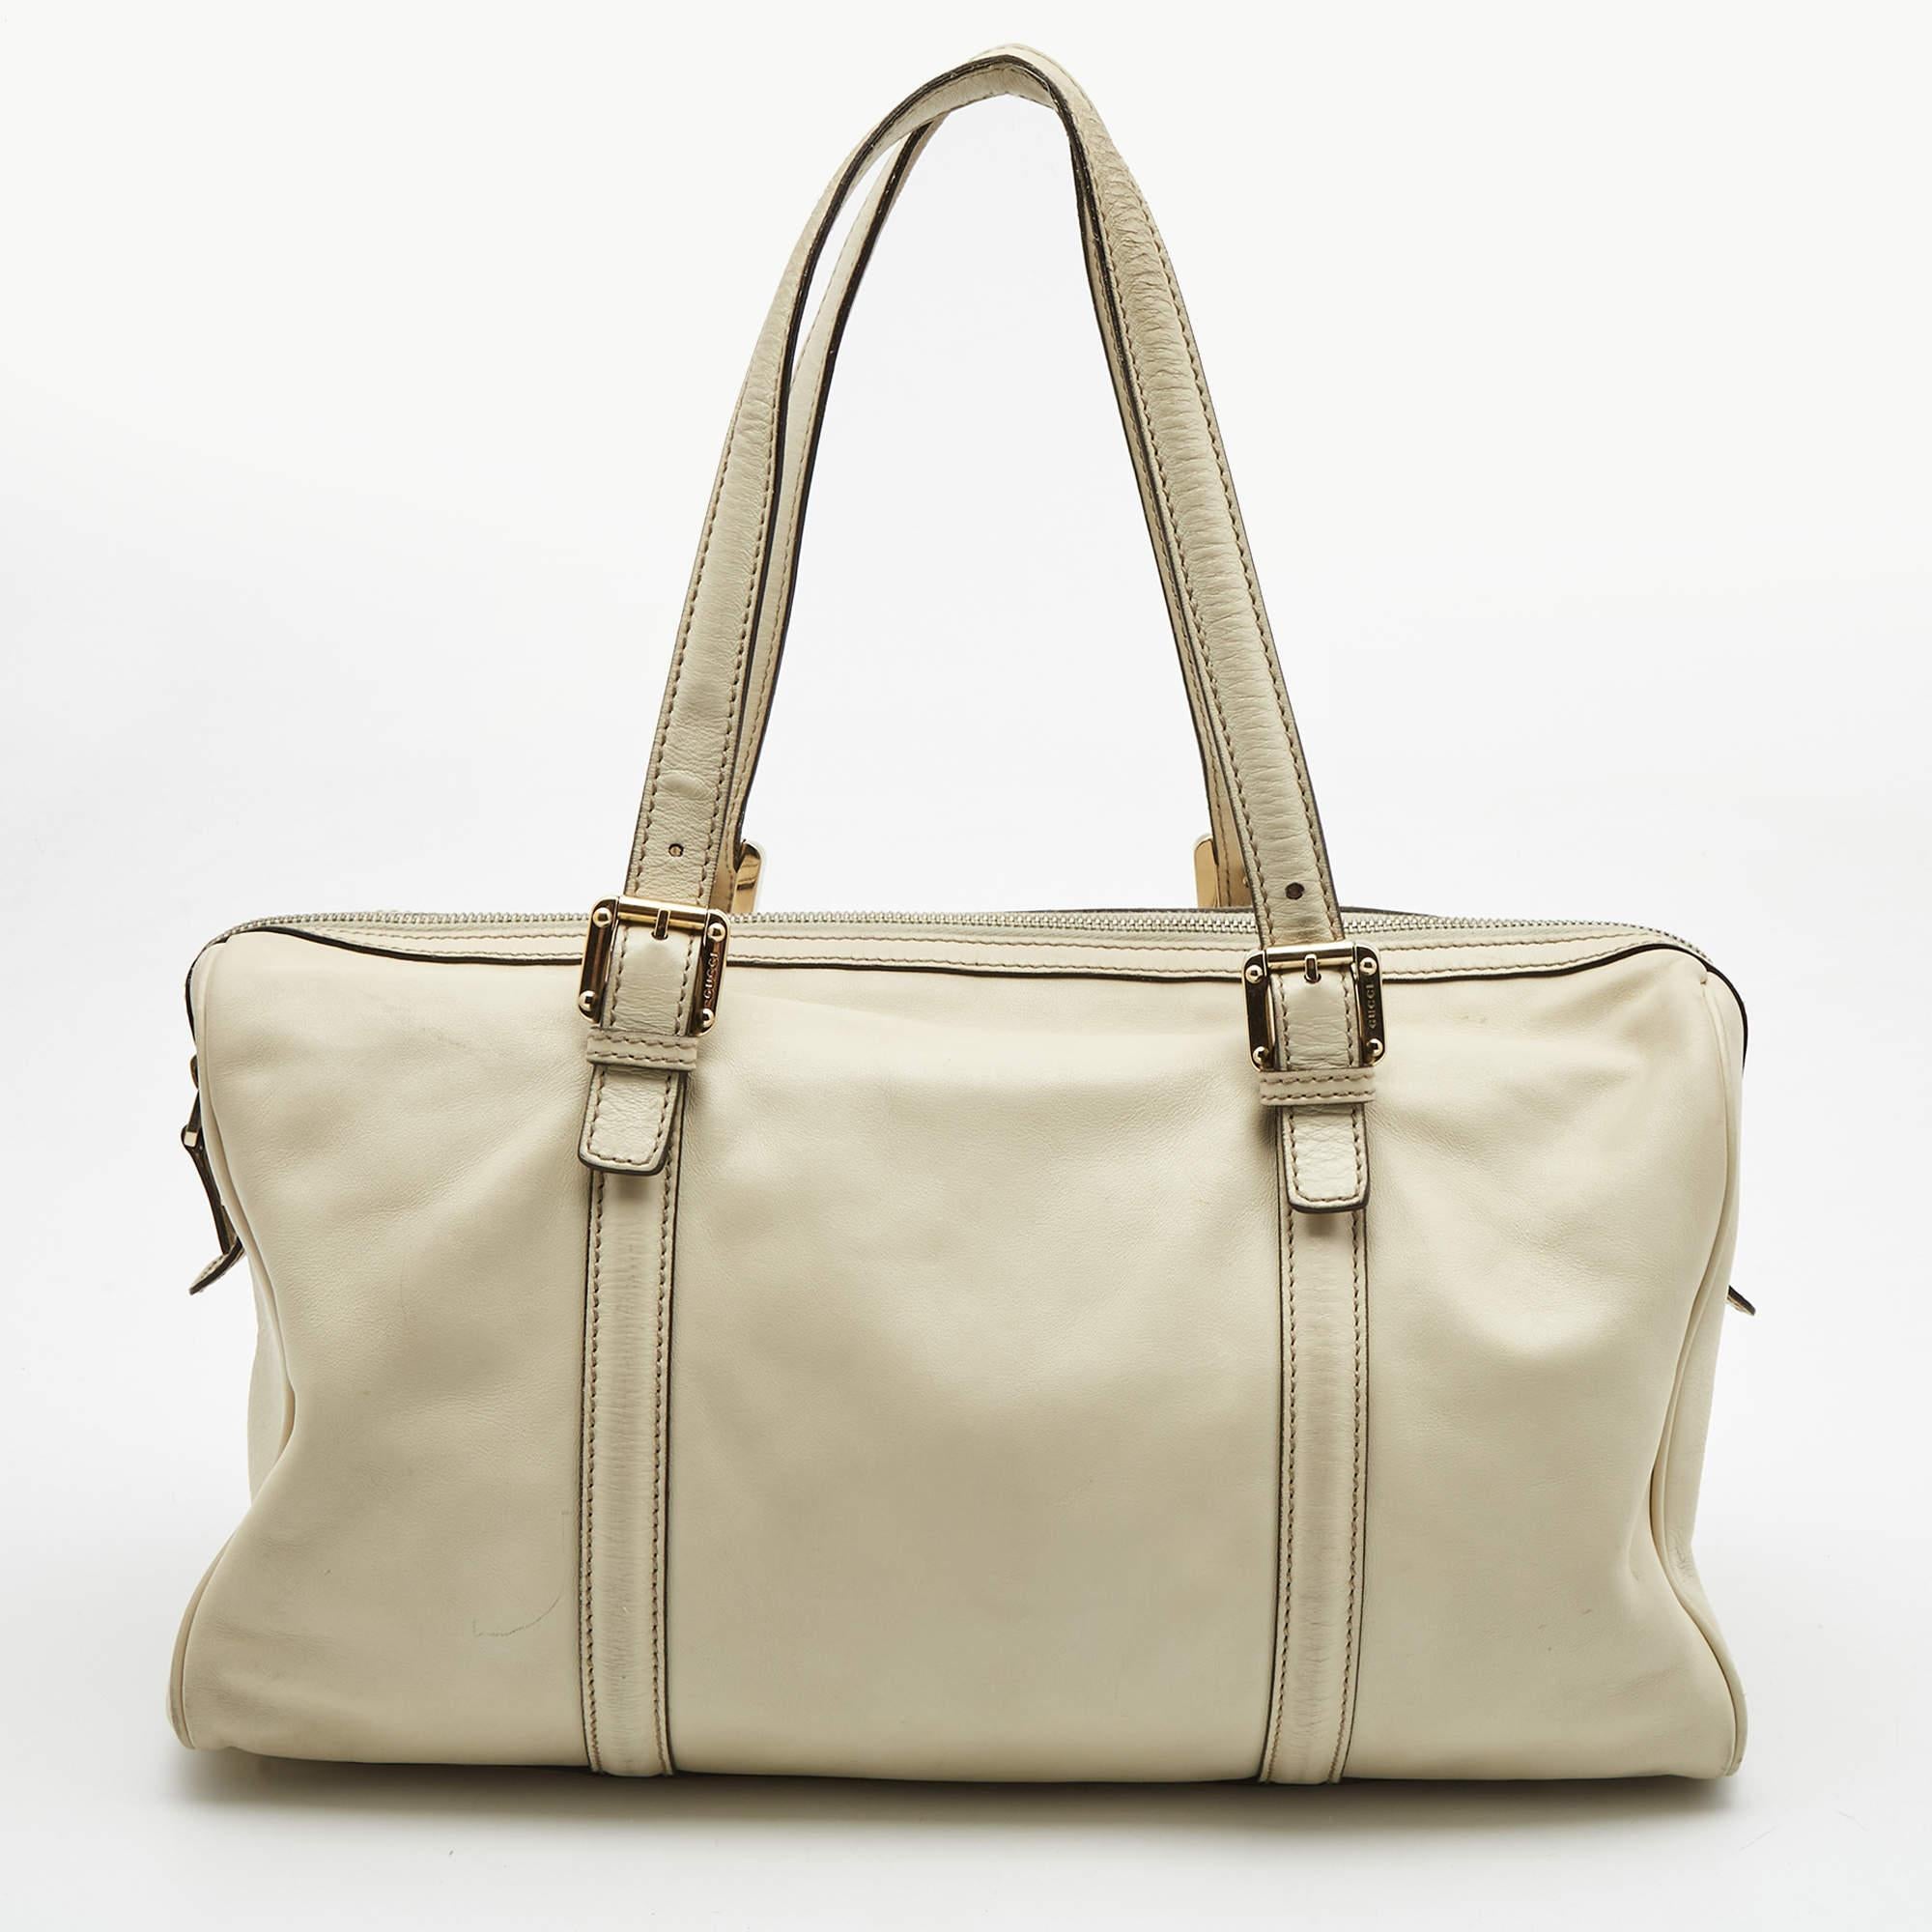 Simple details, high quality, and everyday convenience mark this Britt Boston by Gucci. The bag is made of off-white leather, and it features dual handles, a gold-tone GG logo on the front, and a spacious interior.

